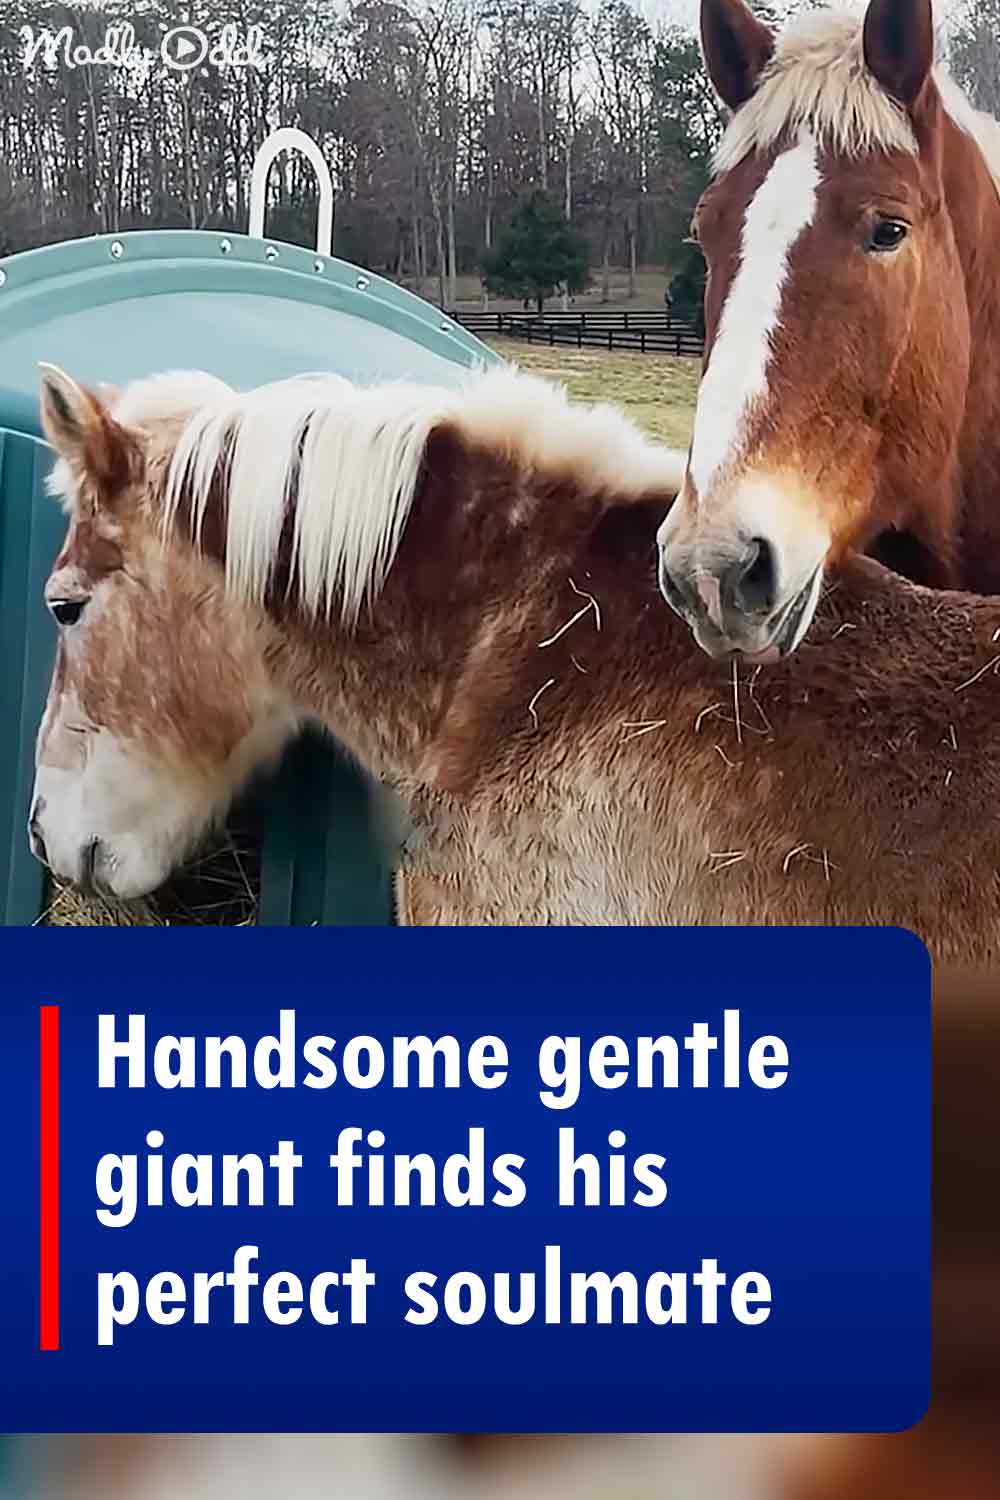 Handsome gentle giant finds his perfect soulmate